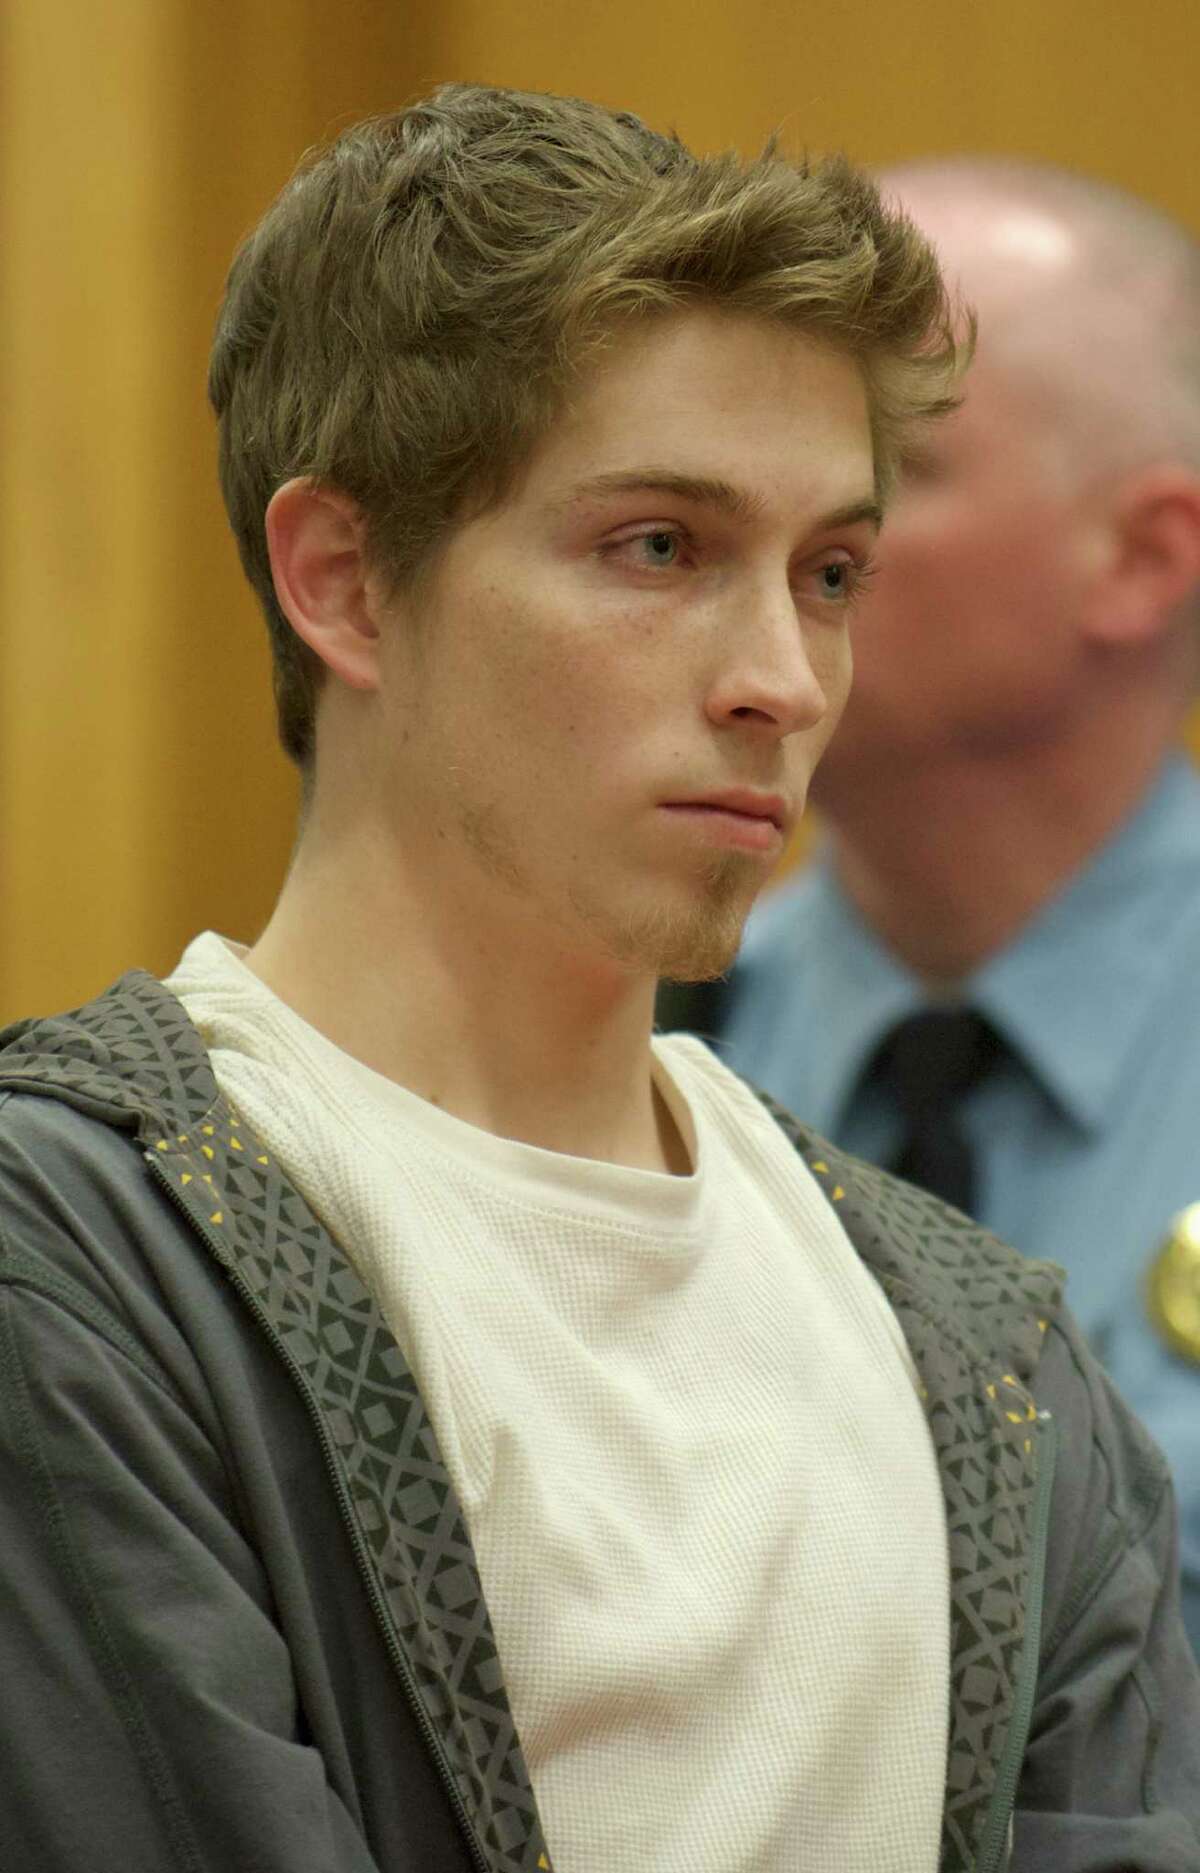 Alexander Lee, 21, appears in superior court in Danbury, Conn, on Wednesday , December 4, 2013,for his arraignment on charges he fled the scene after a cyclist from Weston hit his car on Route 302 in Bethel earlier this year. He was held on $150,000 bail.